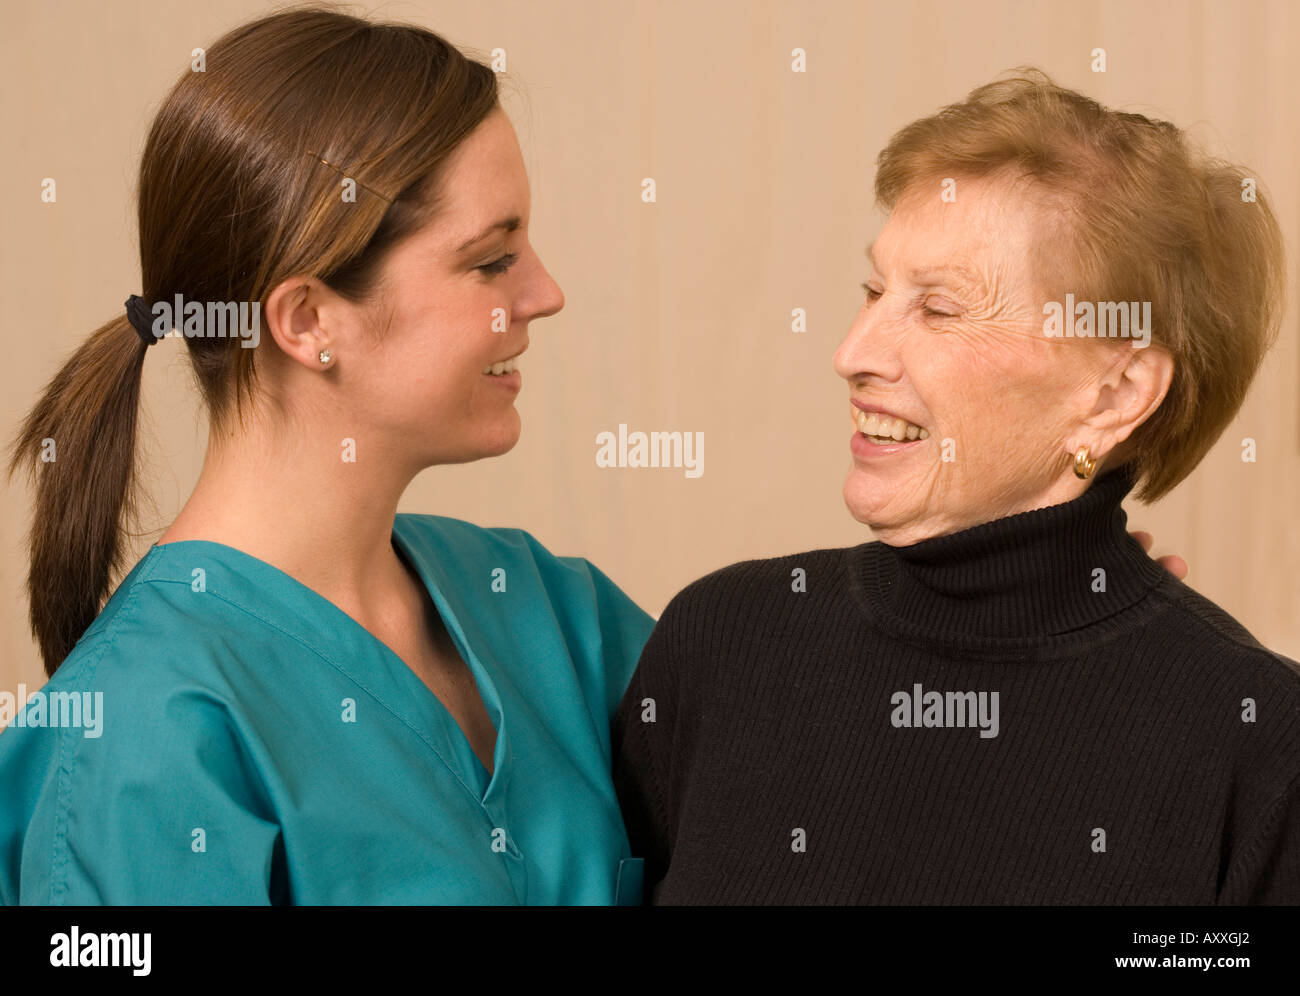 Nurse and patient talk and smile together. Stock Photo